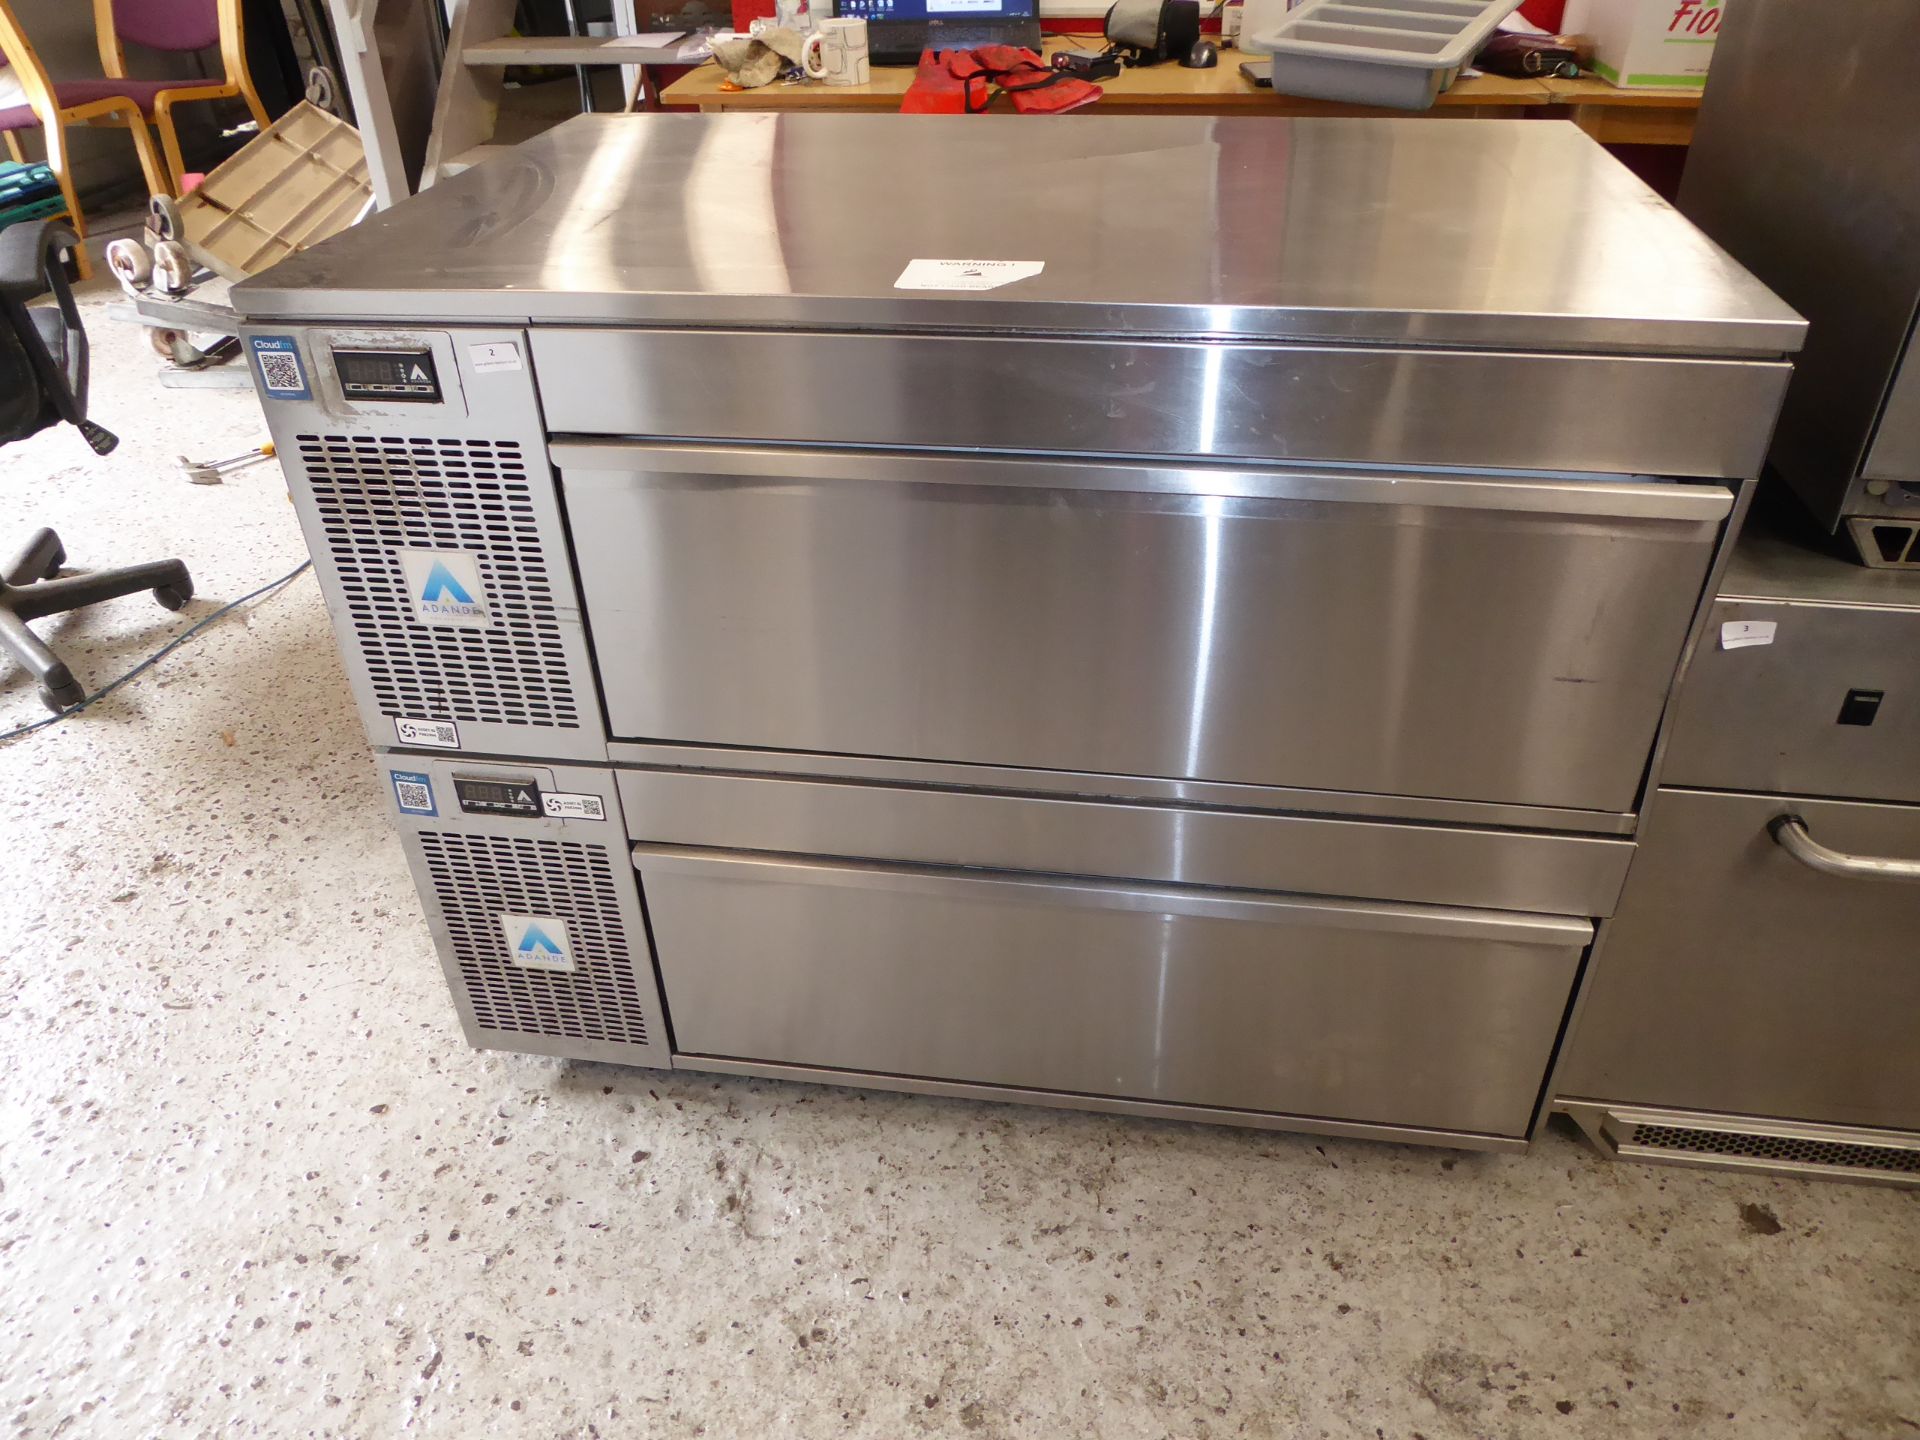 * Adande 2 drawer refrigerator - direct from national chain. RRP new £4400